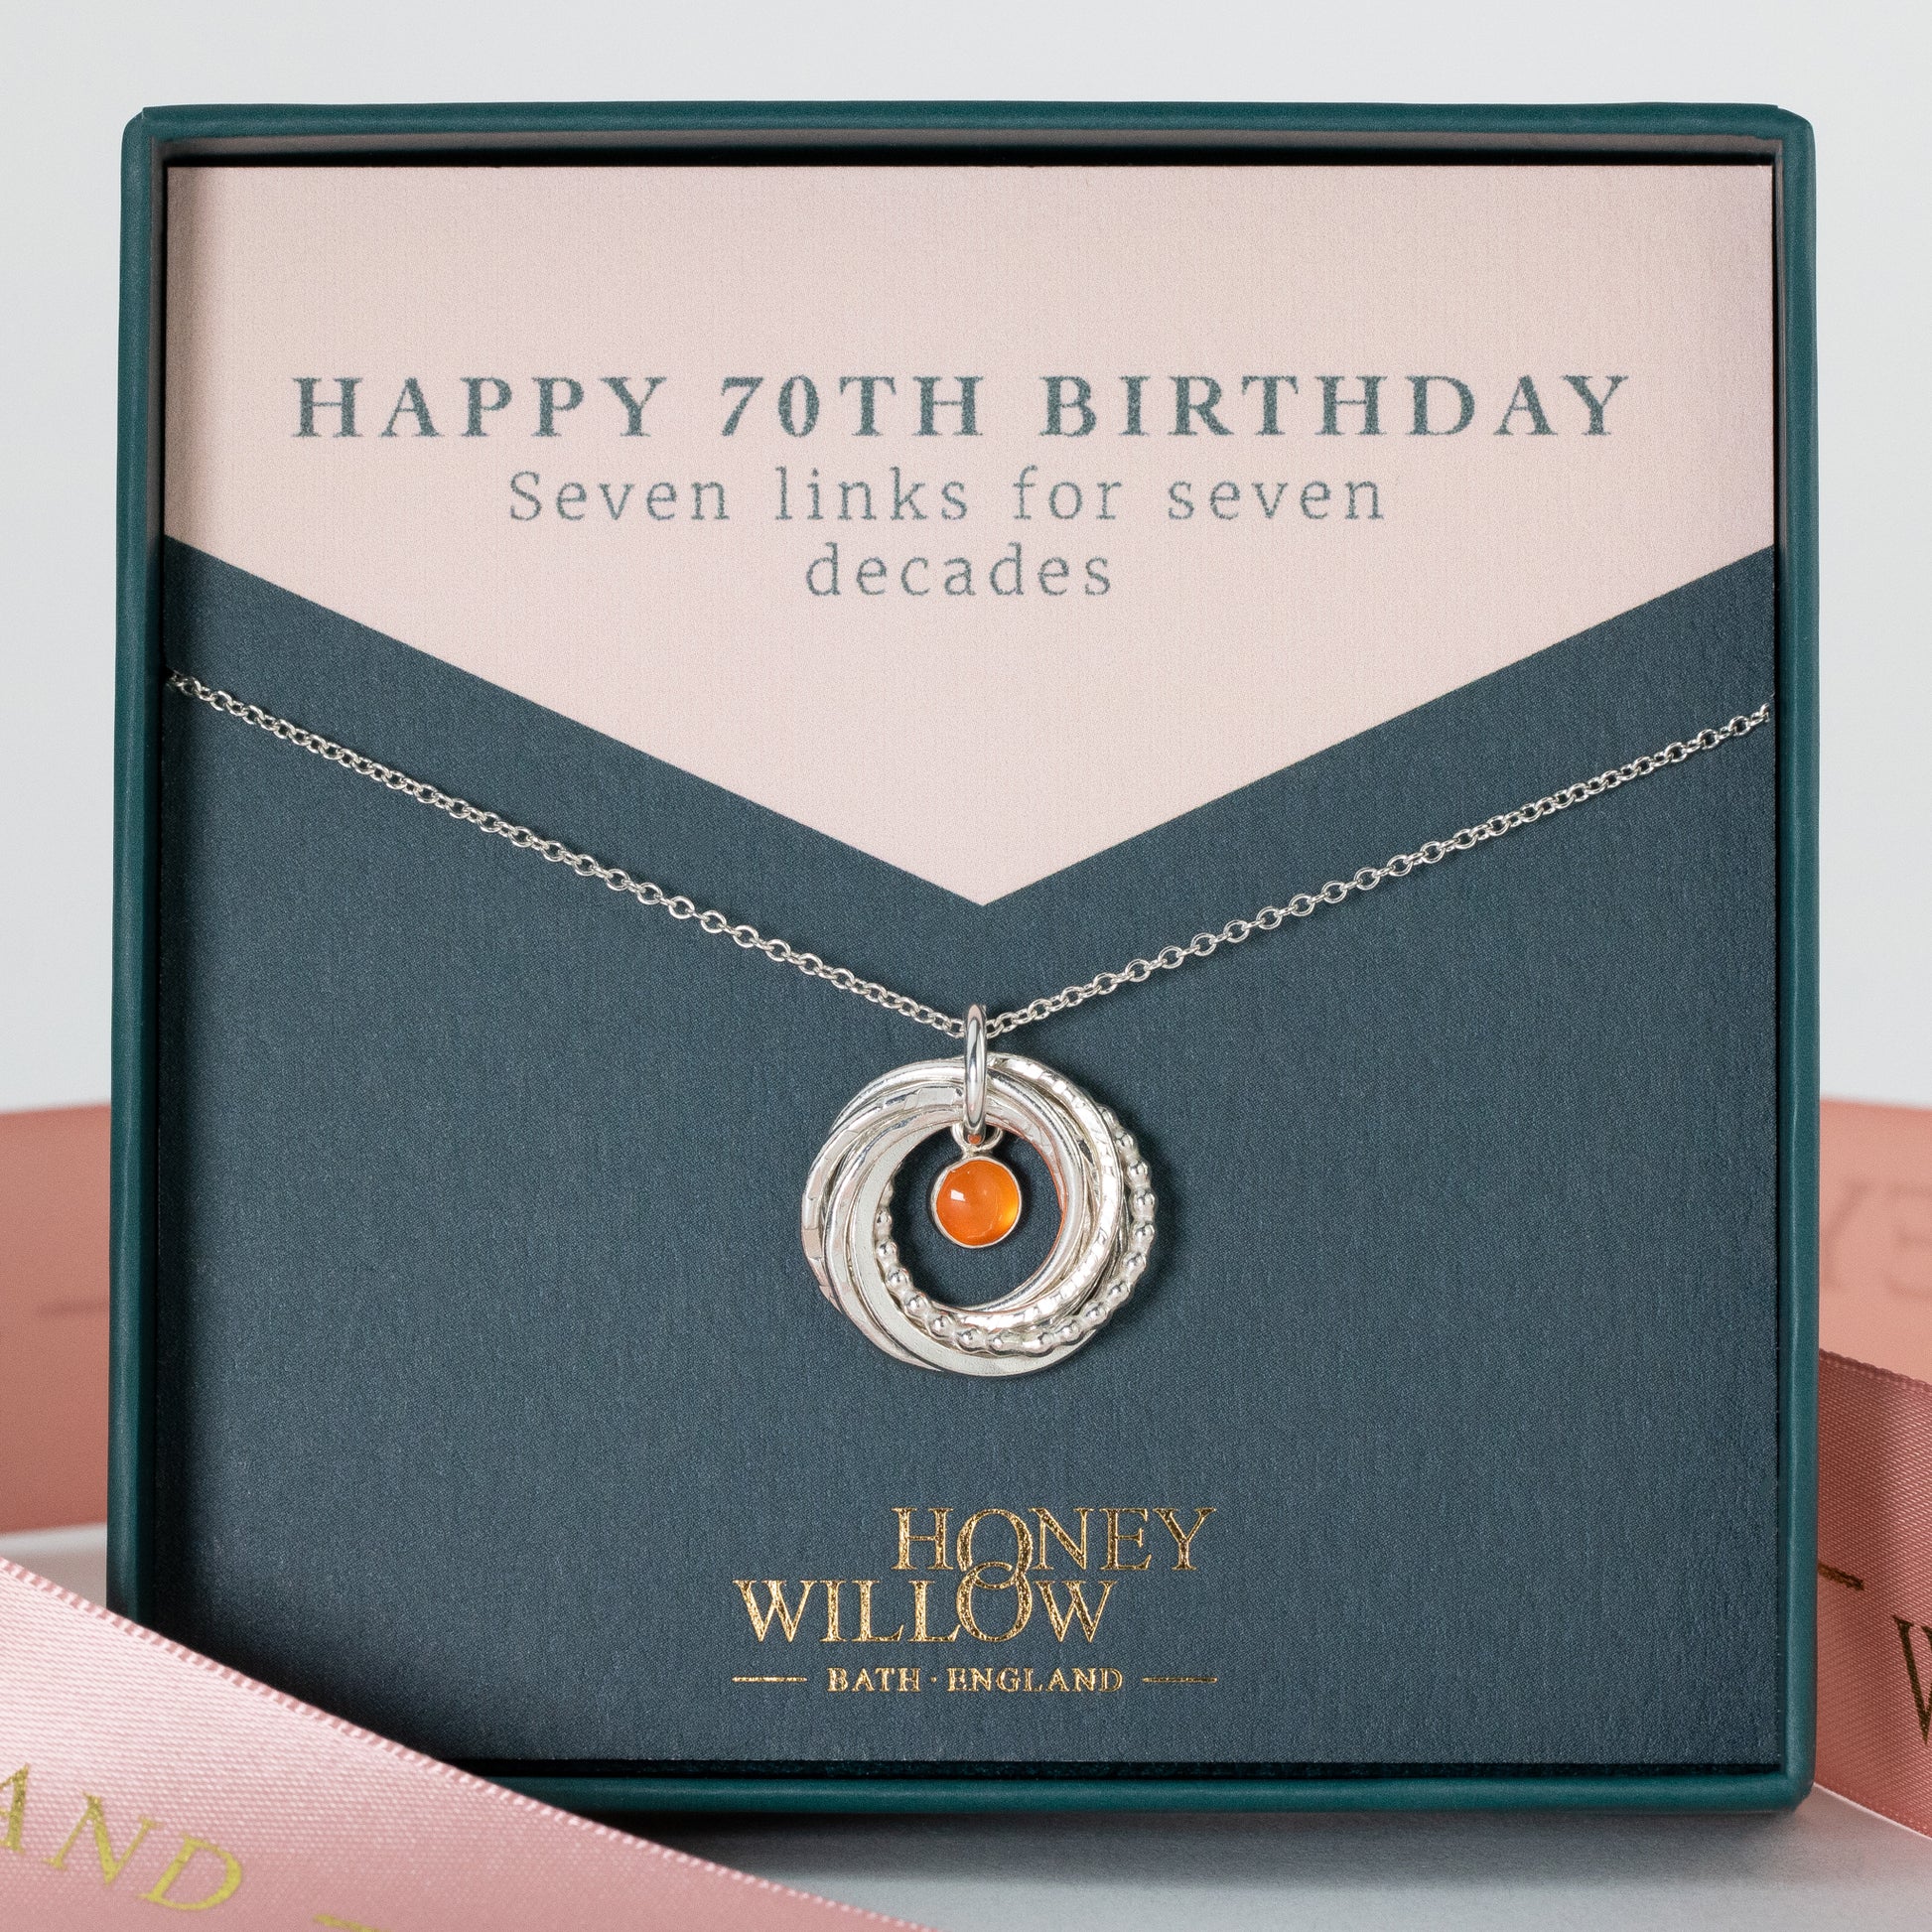 70th Birthday Birthstone Necklace - The Original 7 Links for 7 Decades Necklace - Petite Silver